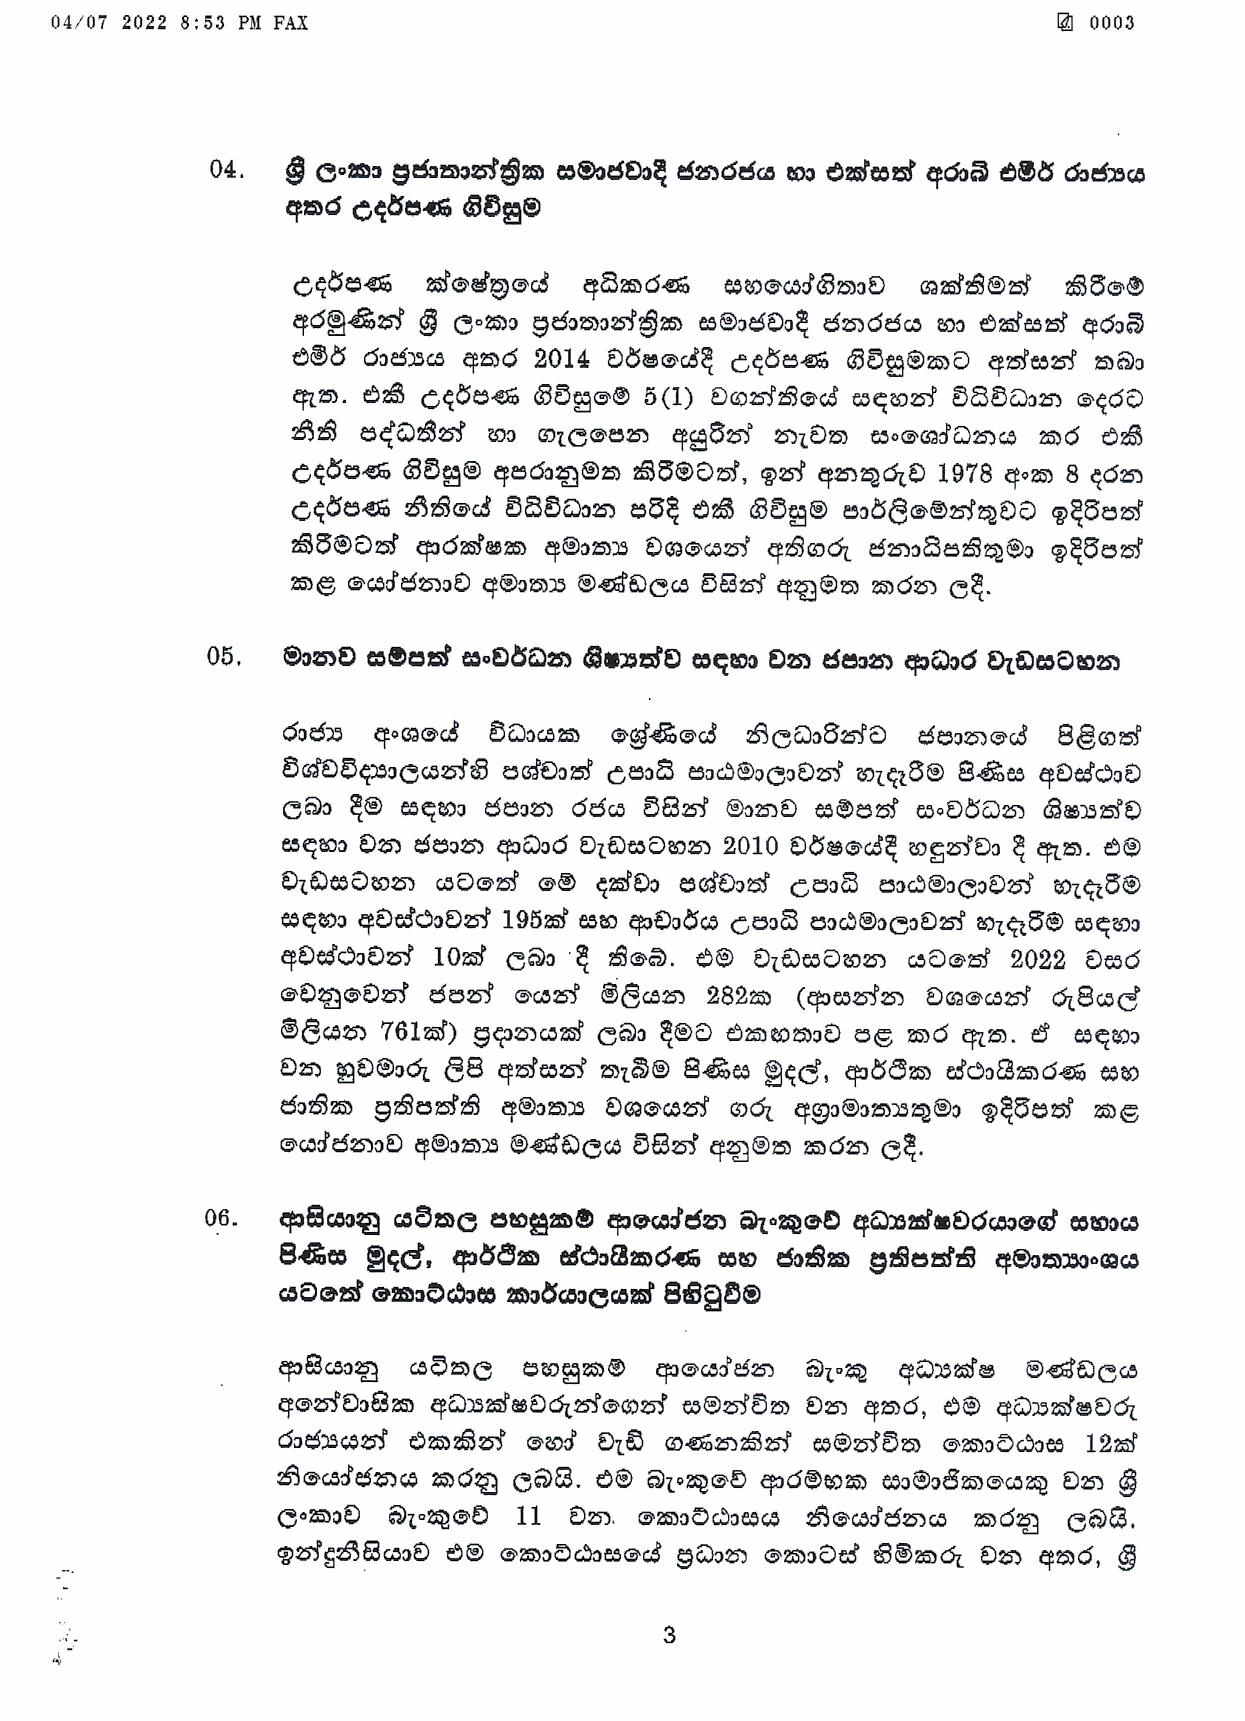 Cabinet Decision on 04.07.2022 page 003